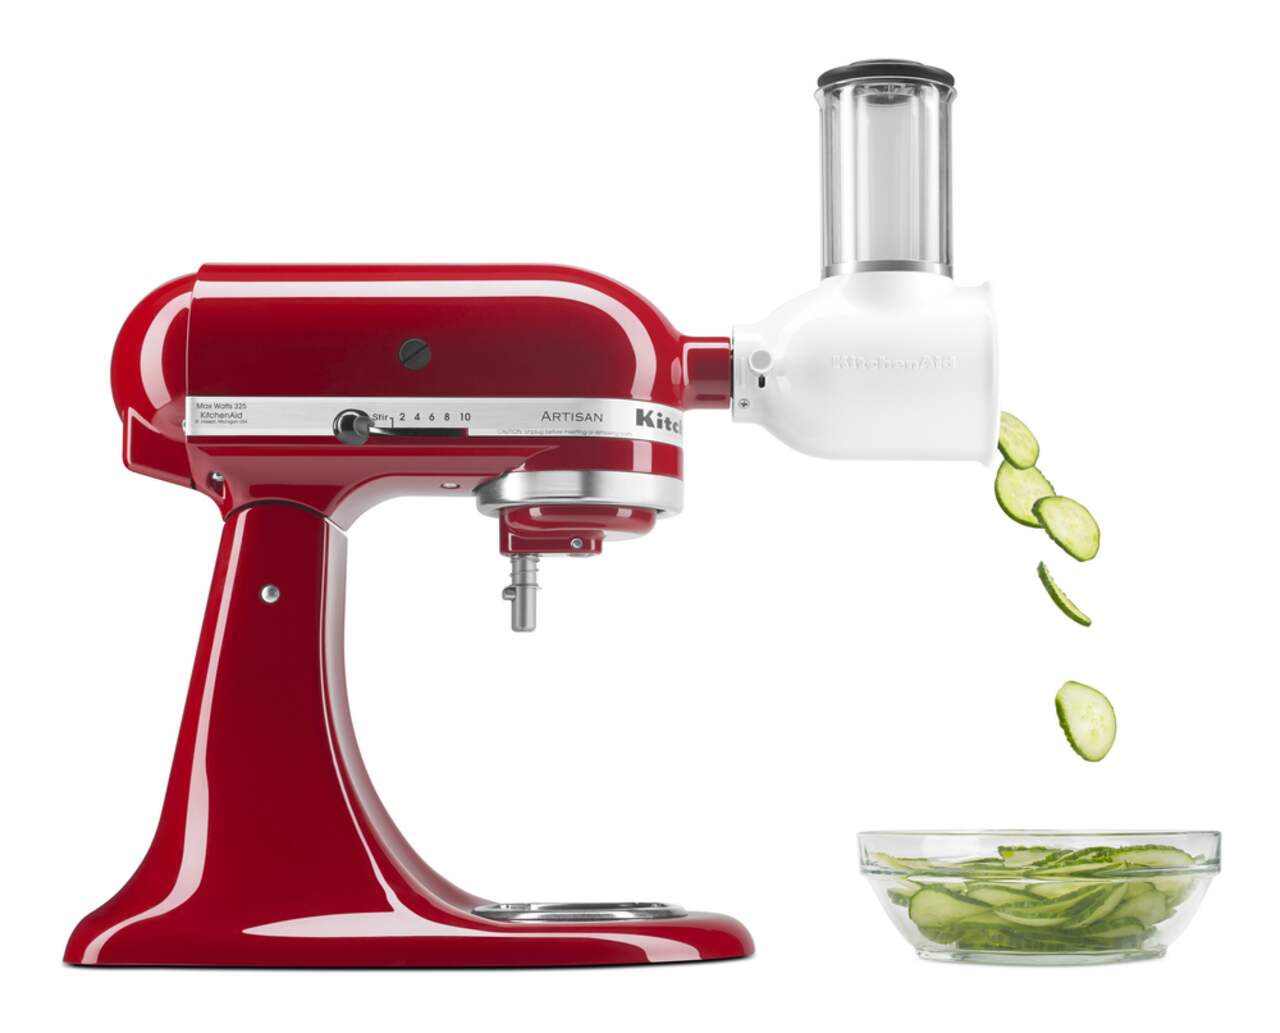 https://media-www.canadiantire.ca/product/living/kitchen/kitchen-appliances/0430030/kitchenaid-roto-slicer-with-shredder-dcf1488f-08a8-41e9-be6c-c5330c3cd073.png?imdensity=1&imwidth=1244&impolicy=mZoom